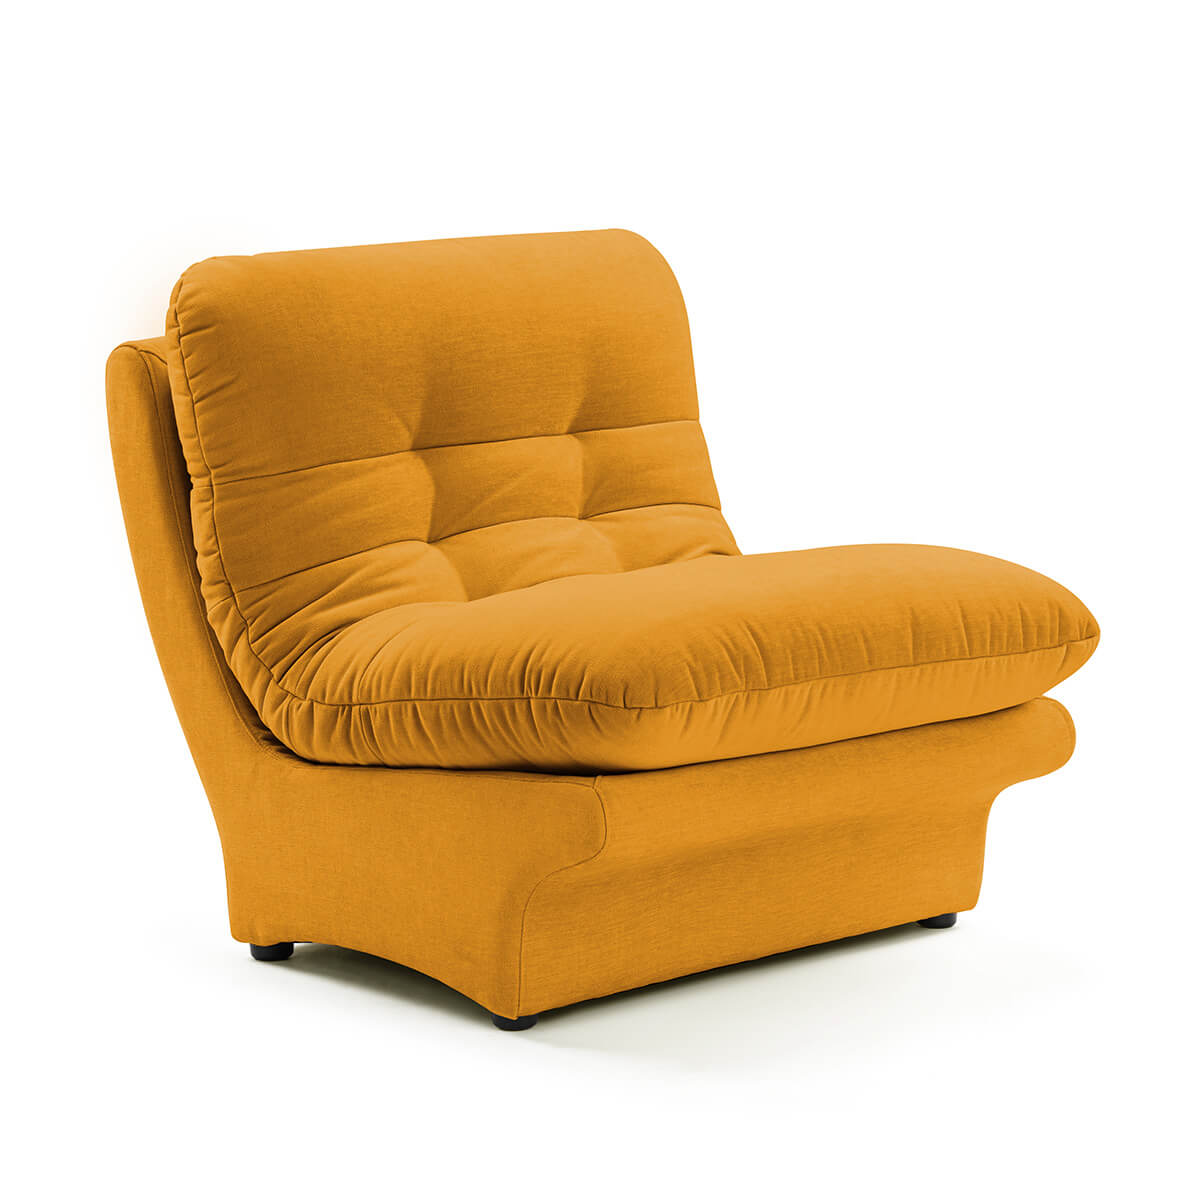 Carsons Mid Century Curved Modular Sectional Sofa / Middle Module Chenille Helios-Mustard Yellow